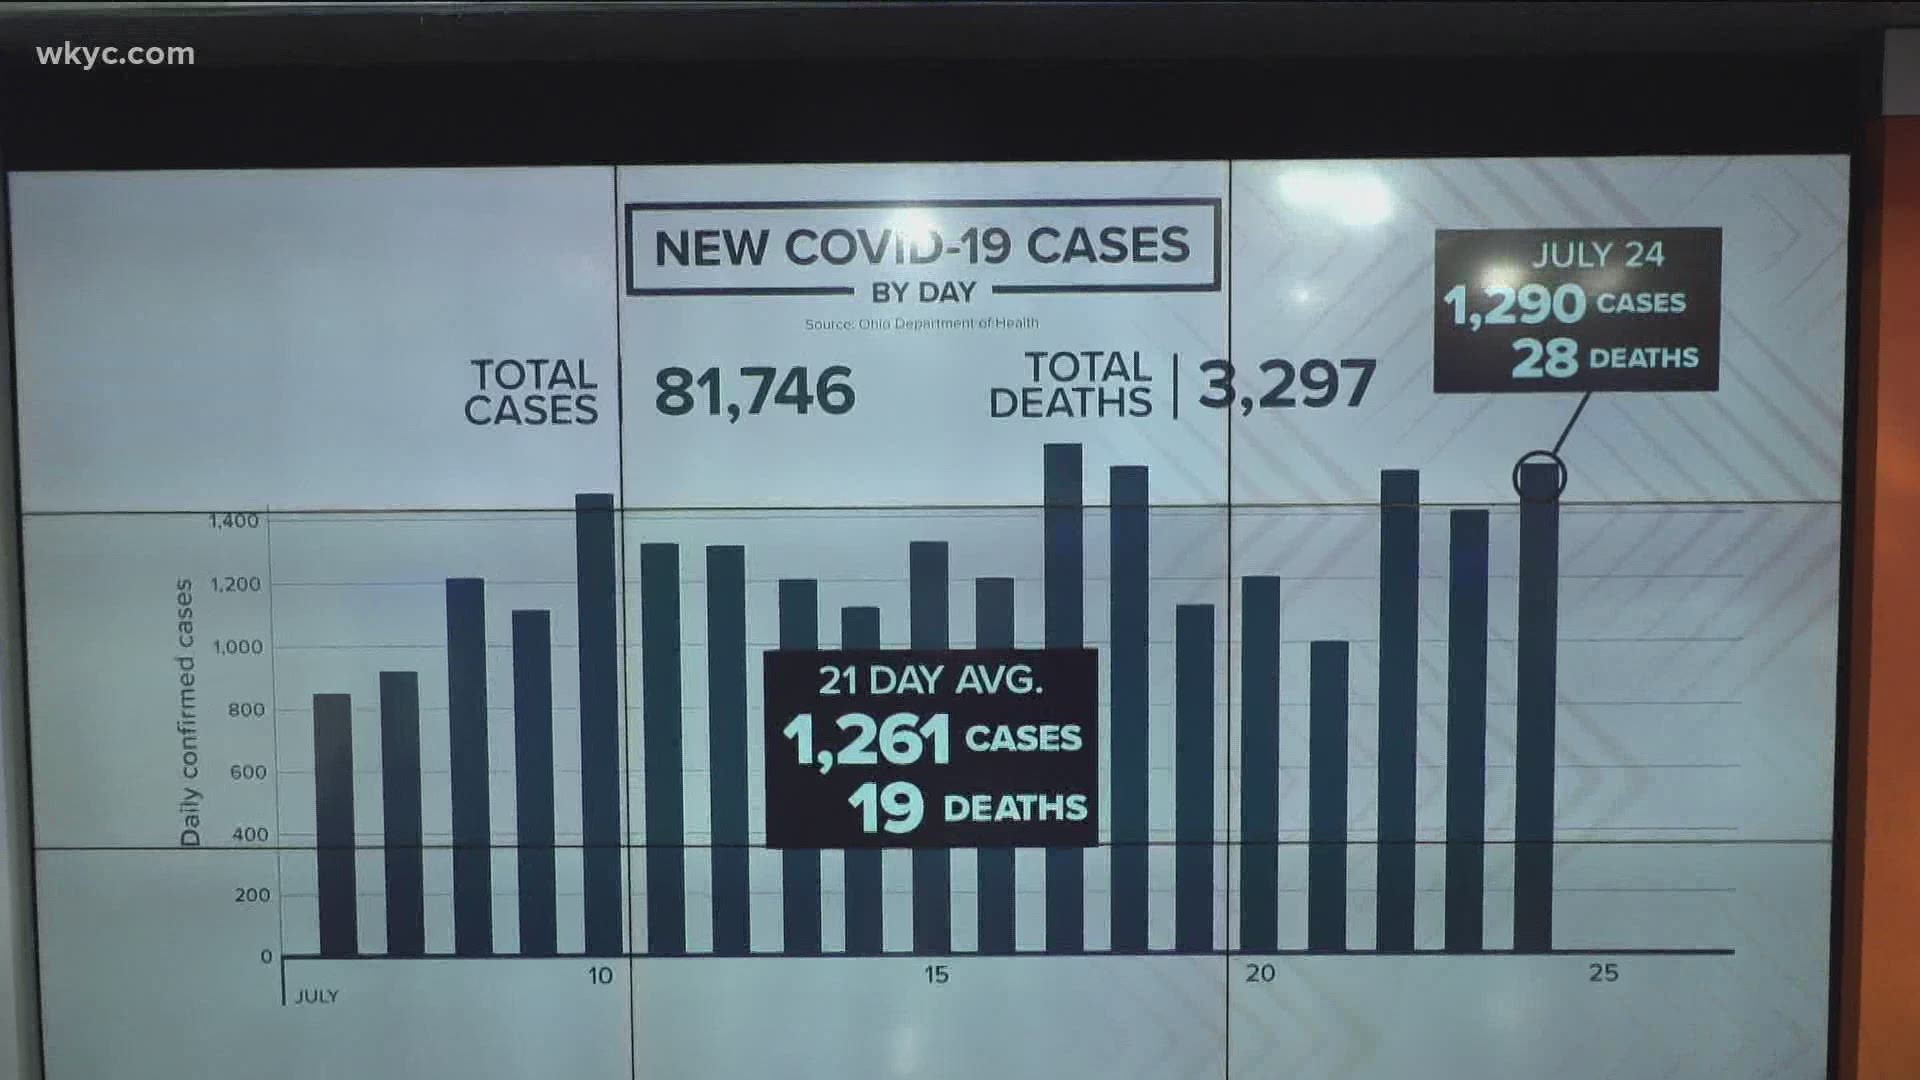 There were 1,290 new coronavirus cases reported today.  There were also 28 deaths in Ohio due to the virus.